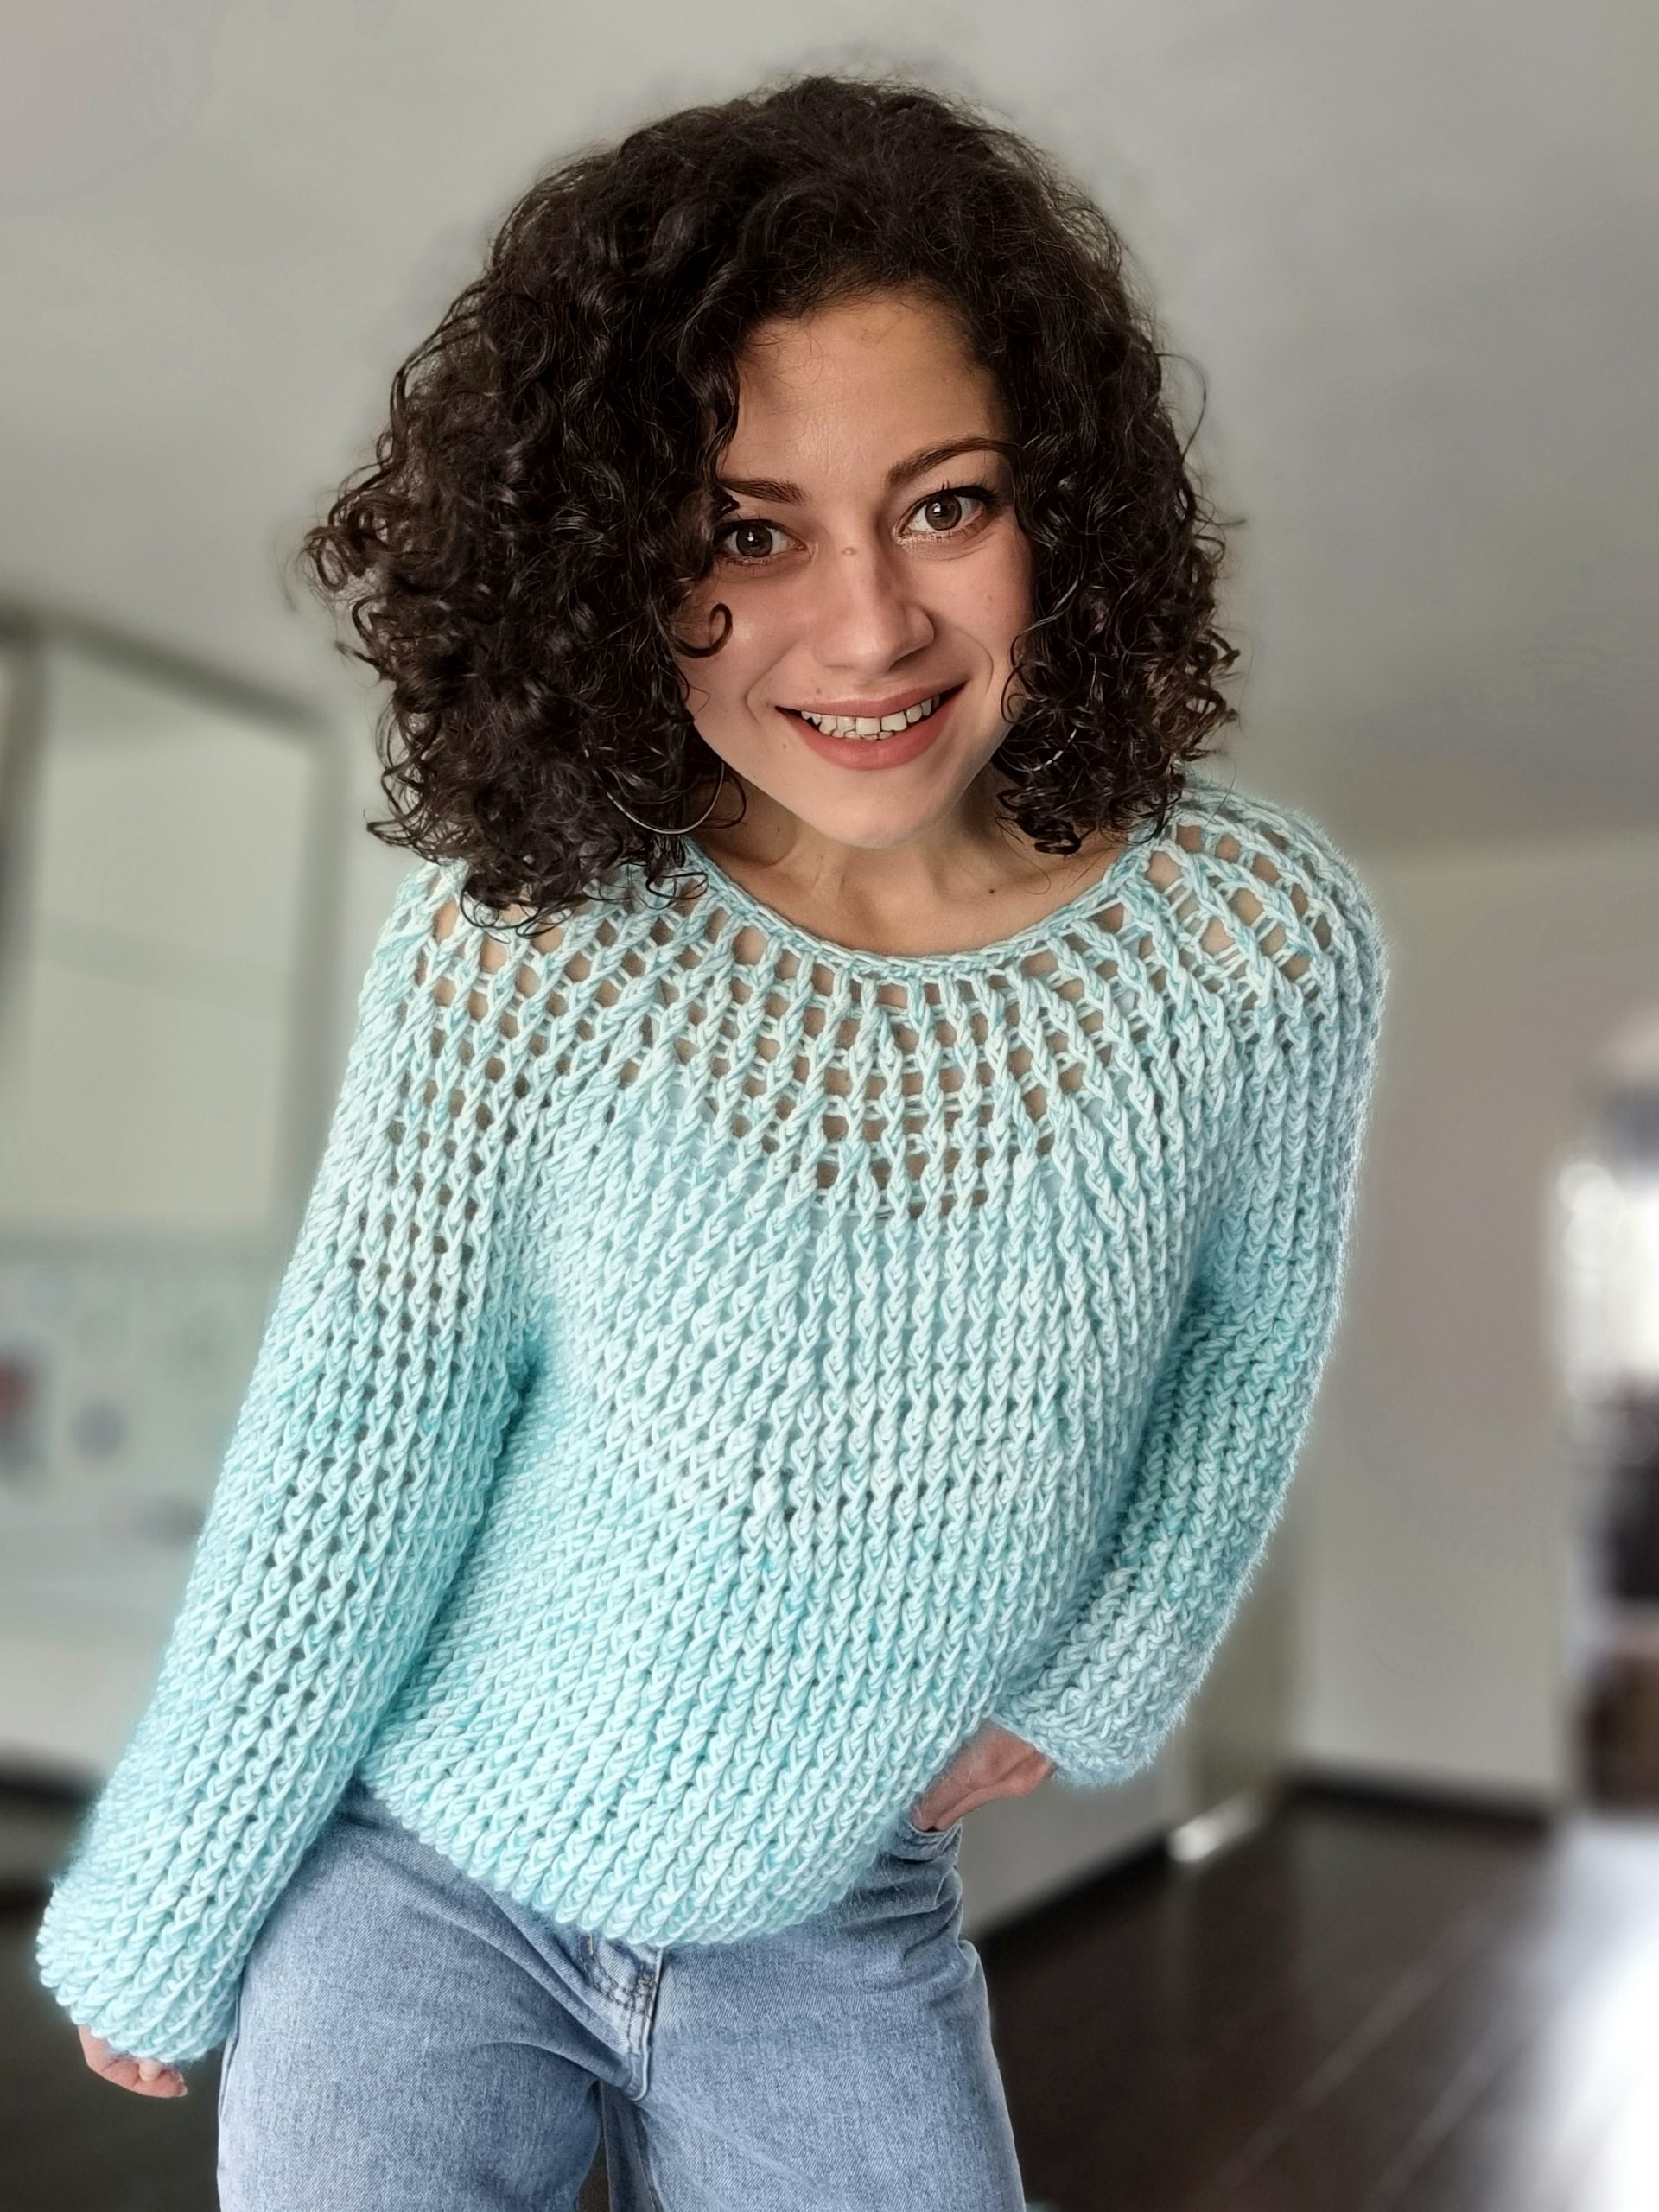 Round Yoke Sweater - FREE Crochet Pullover Pattern by Yay For Yarn